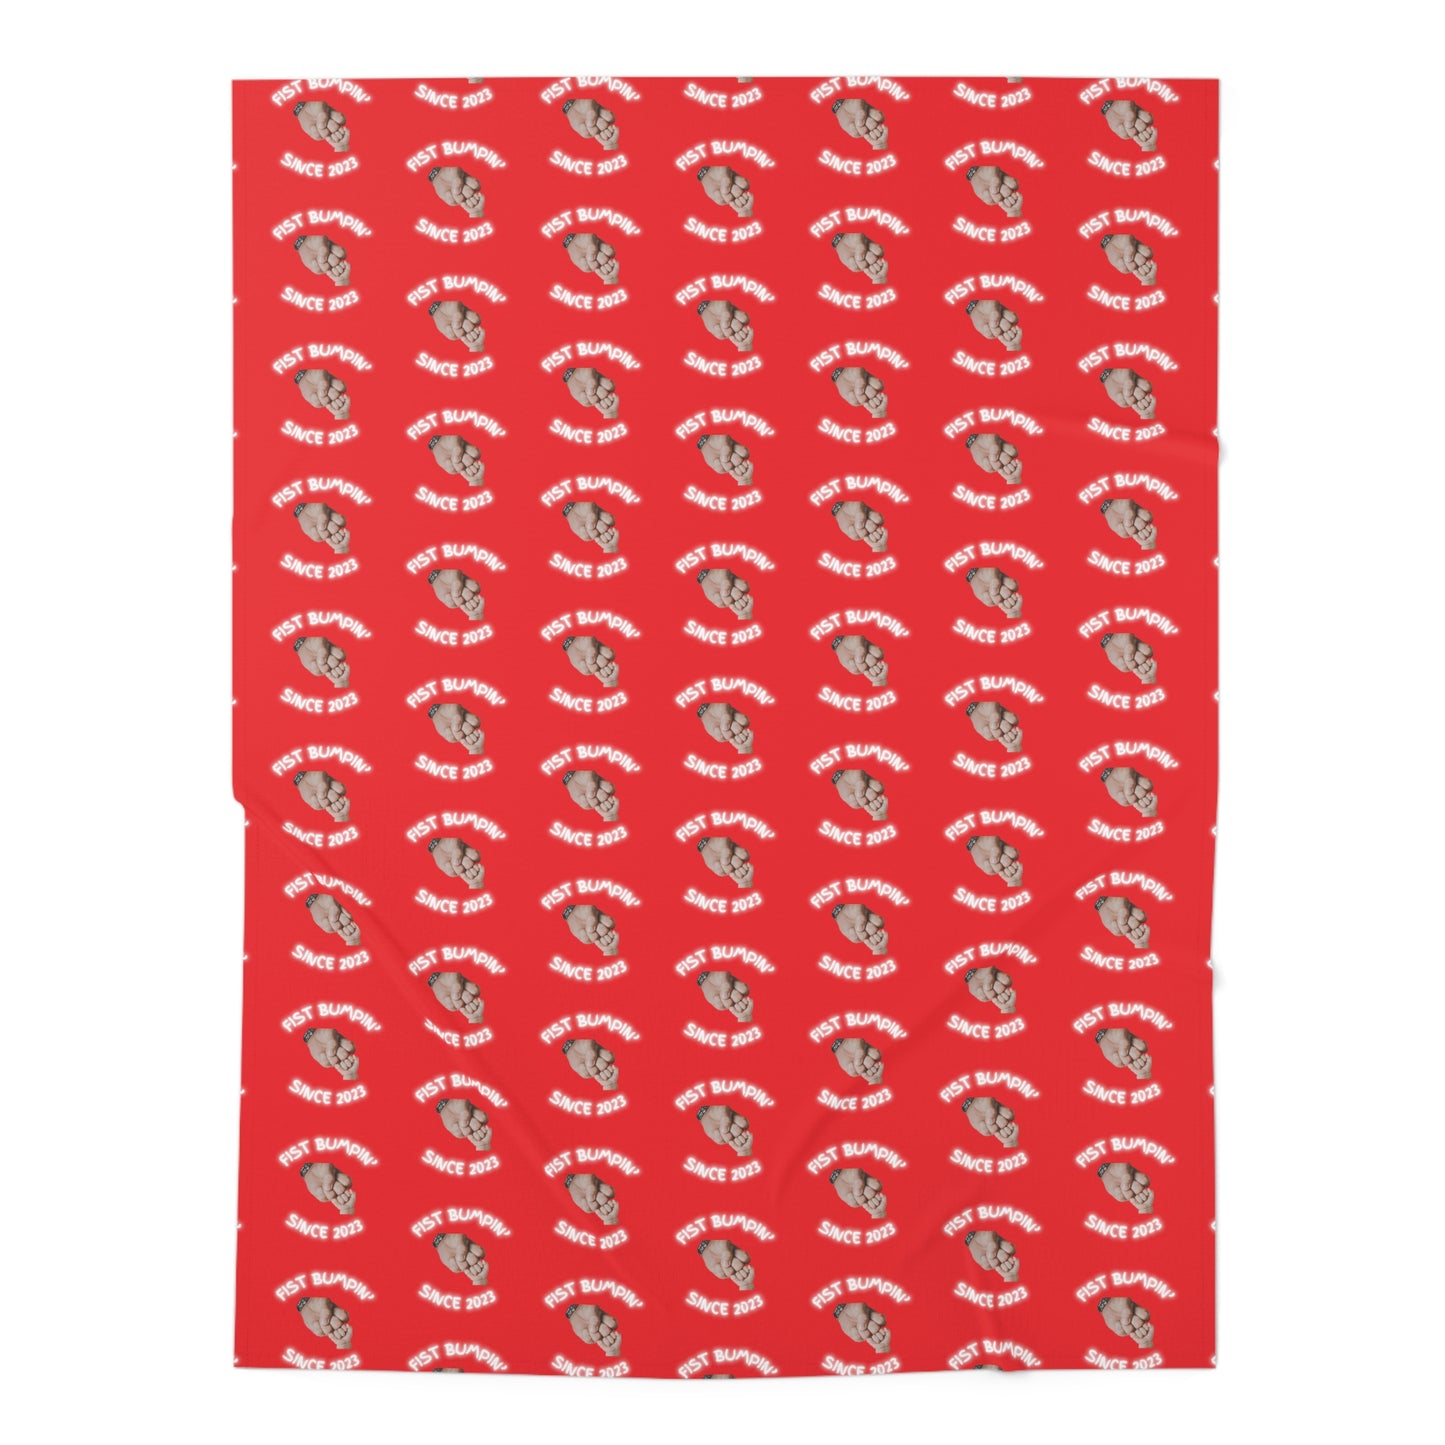 Kansas City White on Red Fist Bumpin’ Since 2023 Baby Swaddle Blanket